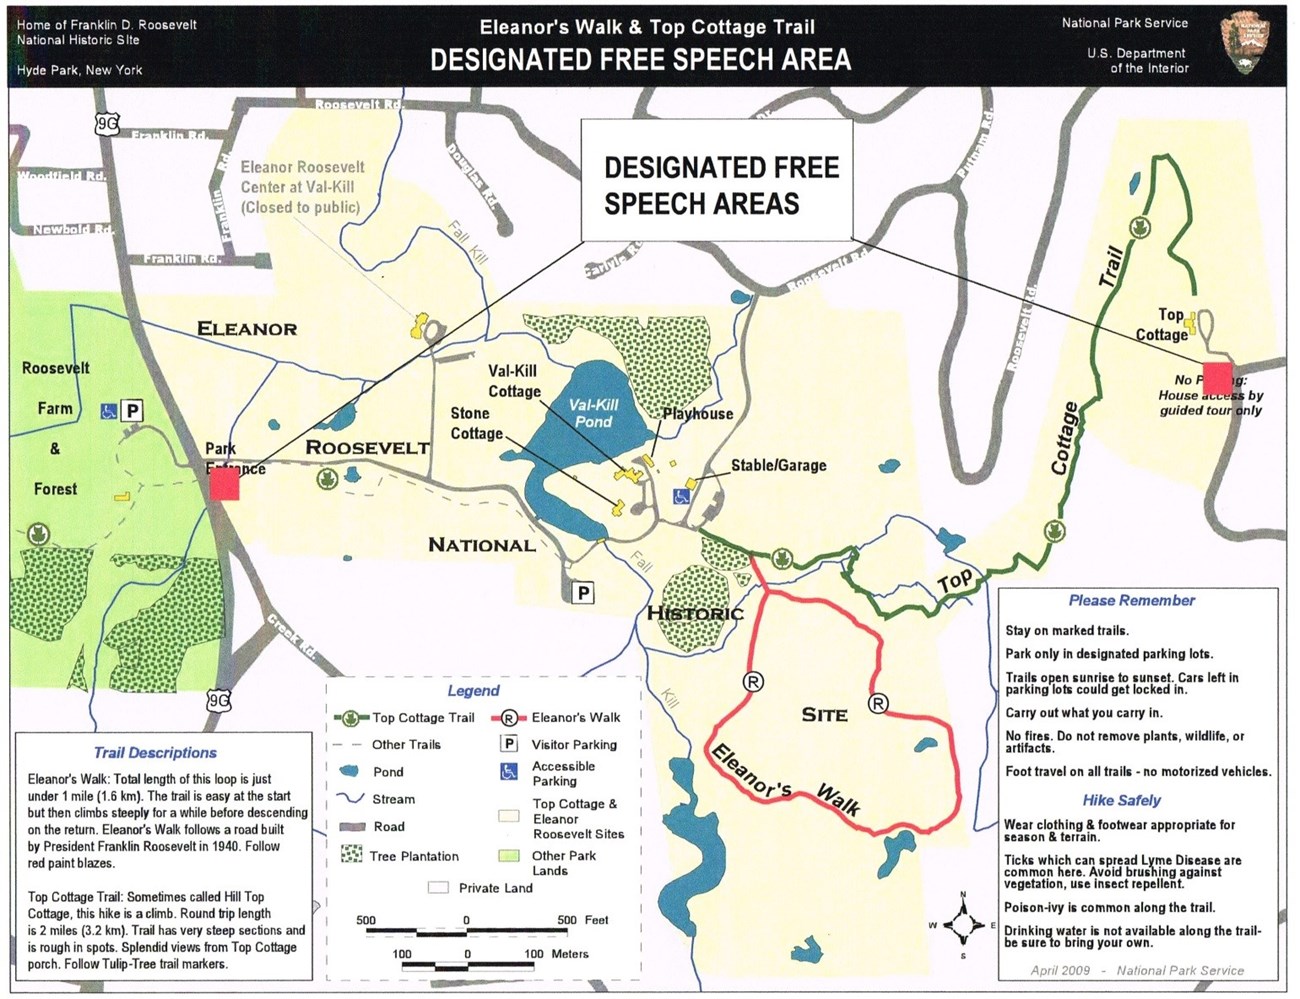 A map showing the free speech areas for Eleanor's Walk and Top Cottage Trail